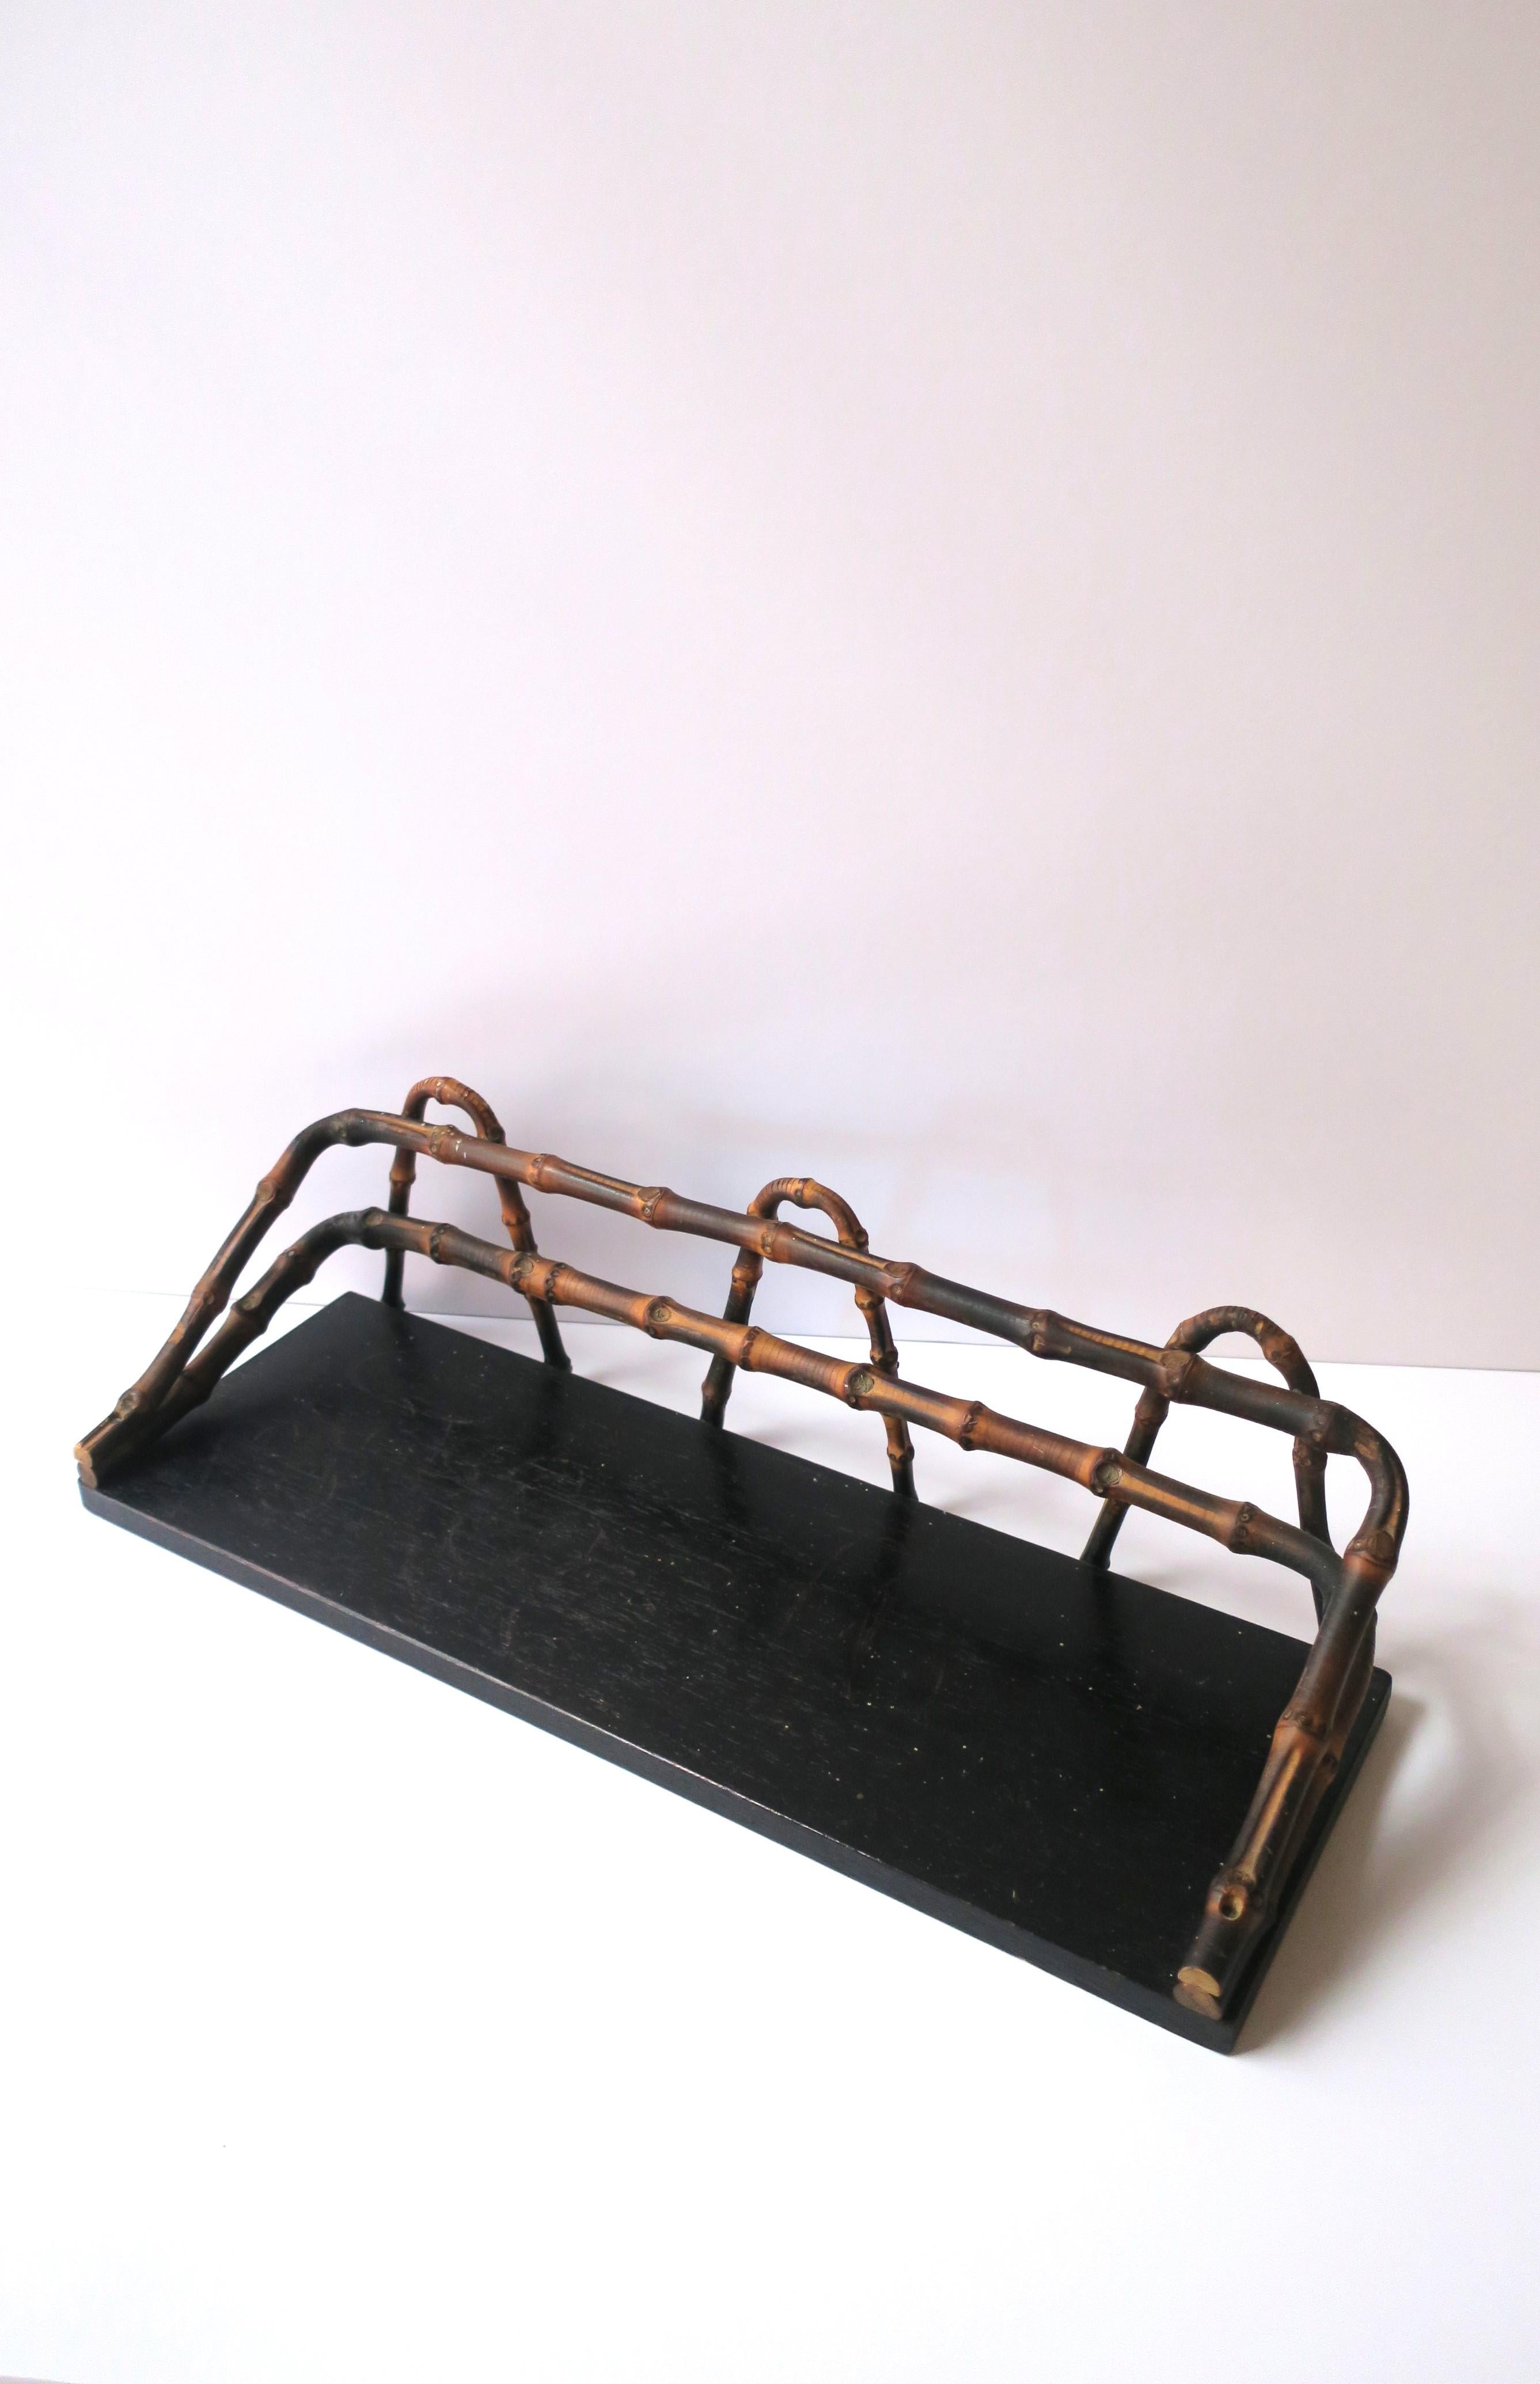 A bamboo framed wood wall shelf, circa early to mid-20th century. Wall shelf is rectangular with an ebonized wood base and a rich bamboo frame around edge. Quality bamboo as shown. A great piece to hold items in a bath or vanity area (as